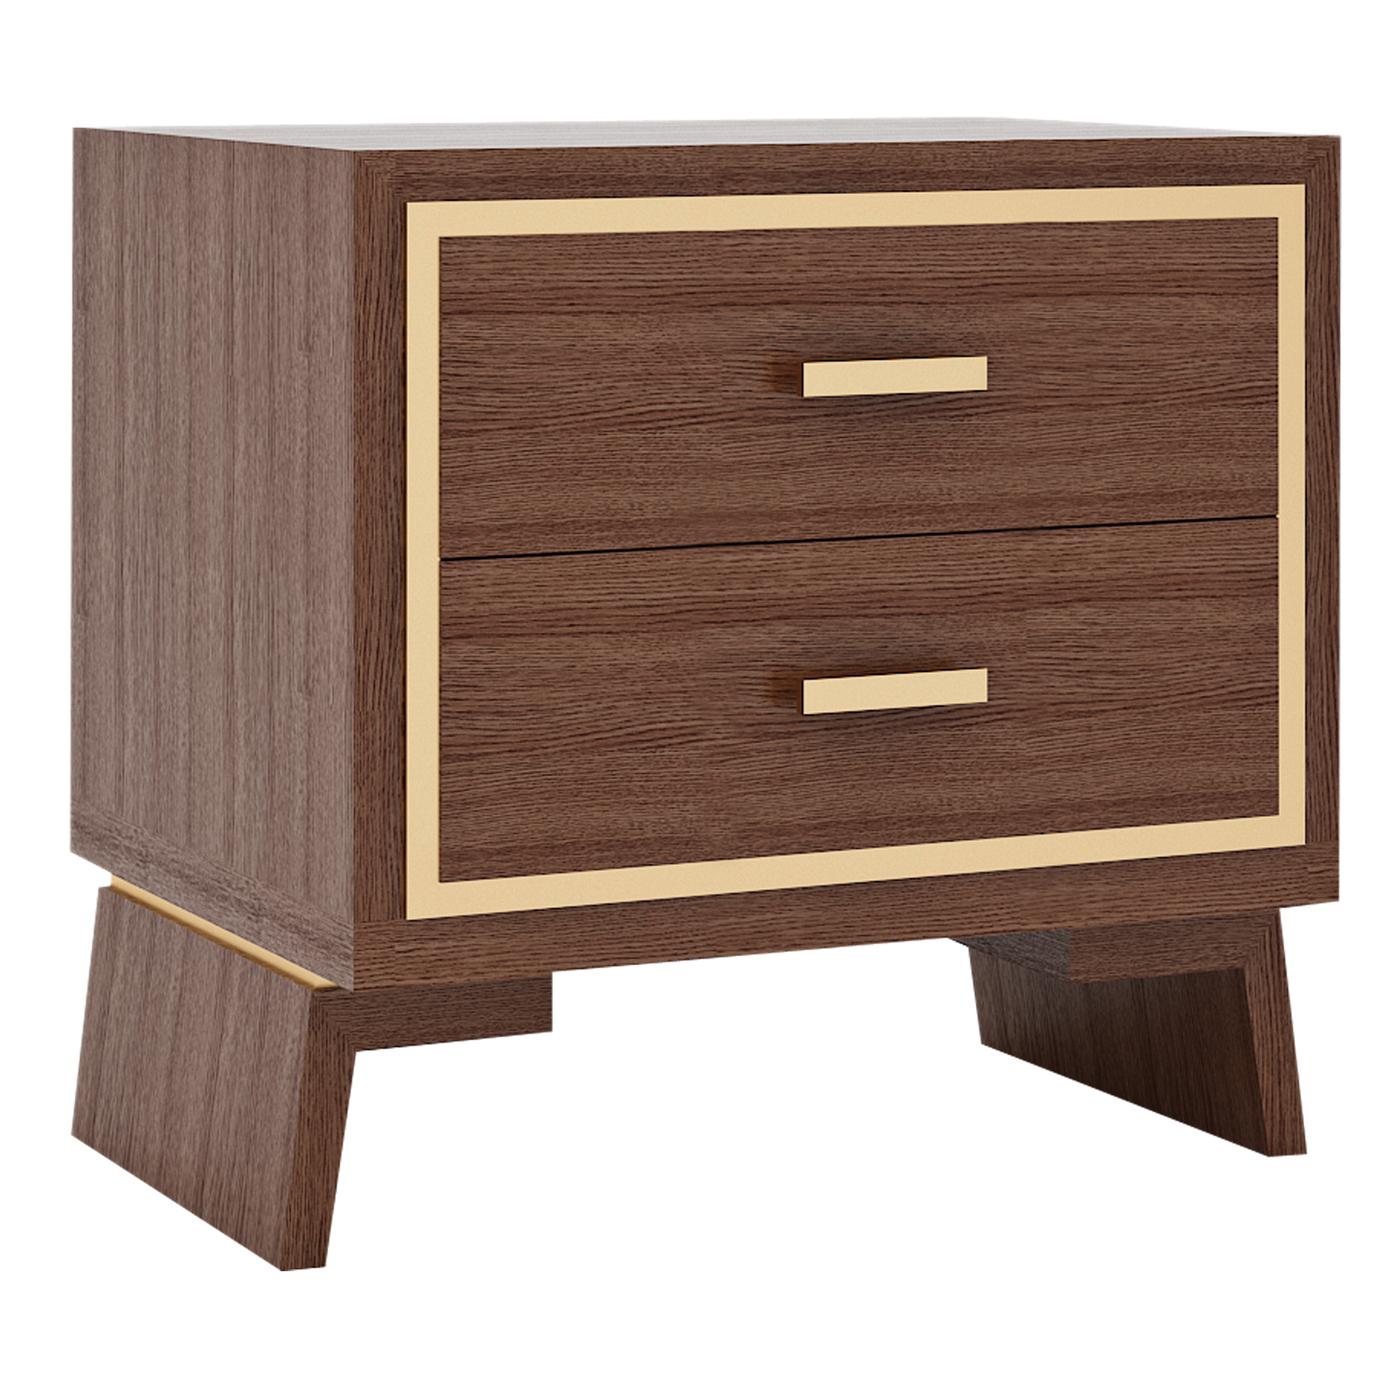 Elegant and restrained lines characterize this wooden variant of the Hamptons nightstand. Two sloped, sturdy legs support the structure that includes two drawers, whose front side is framed by a thin brass-finished metal band. The same finish is